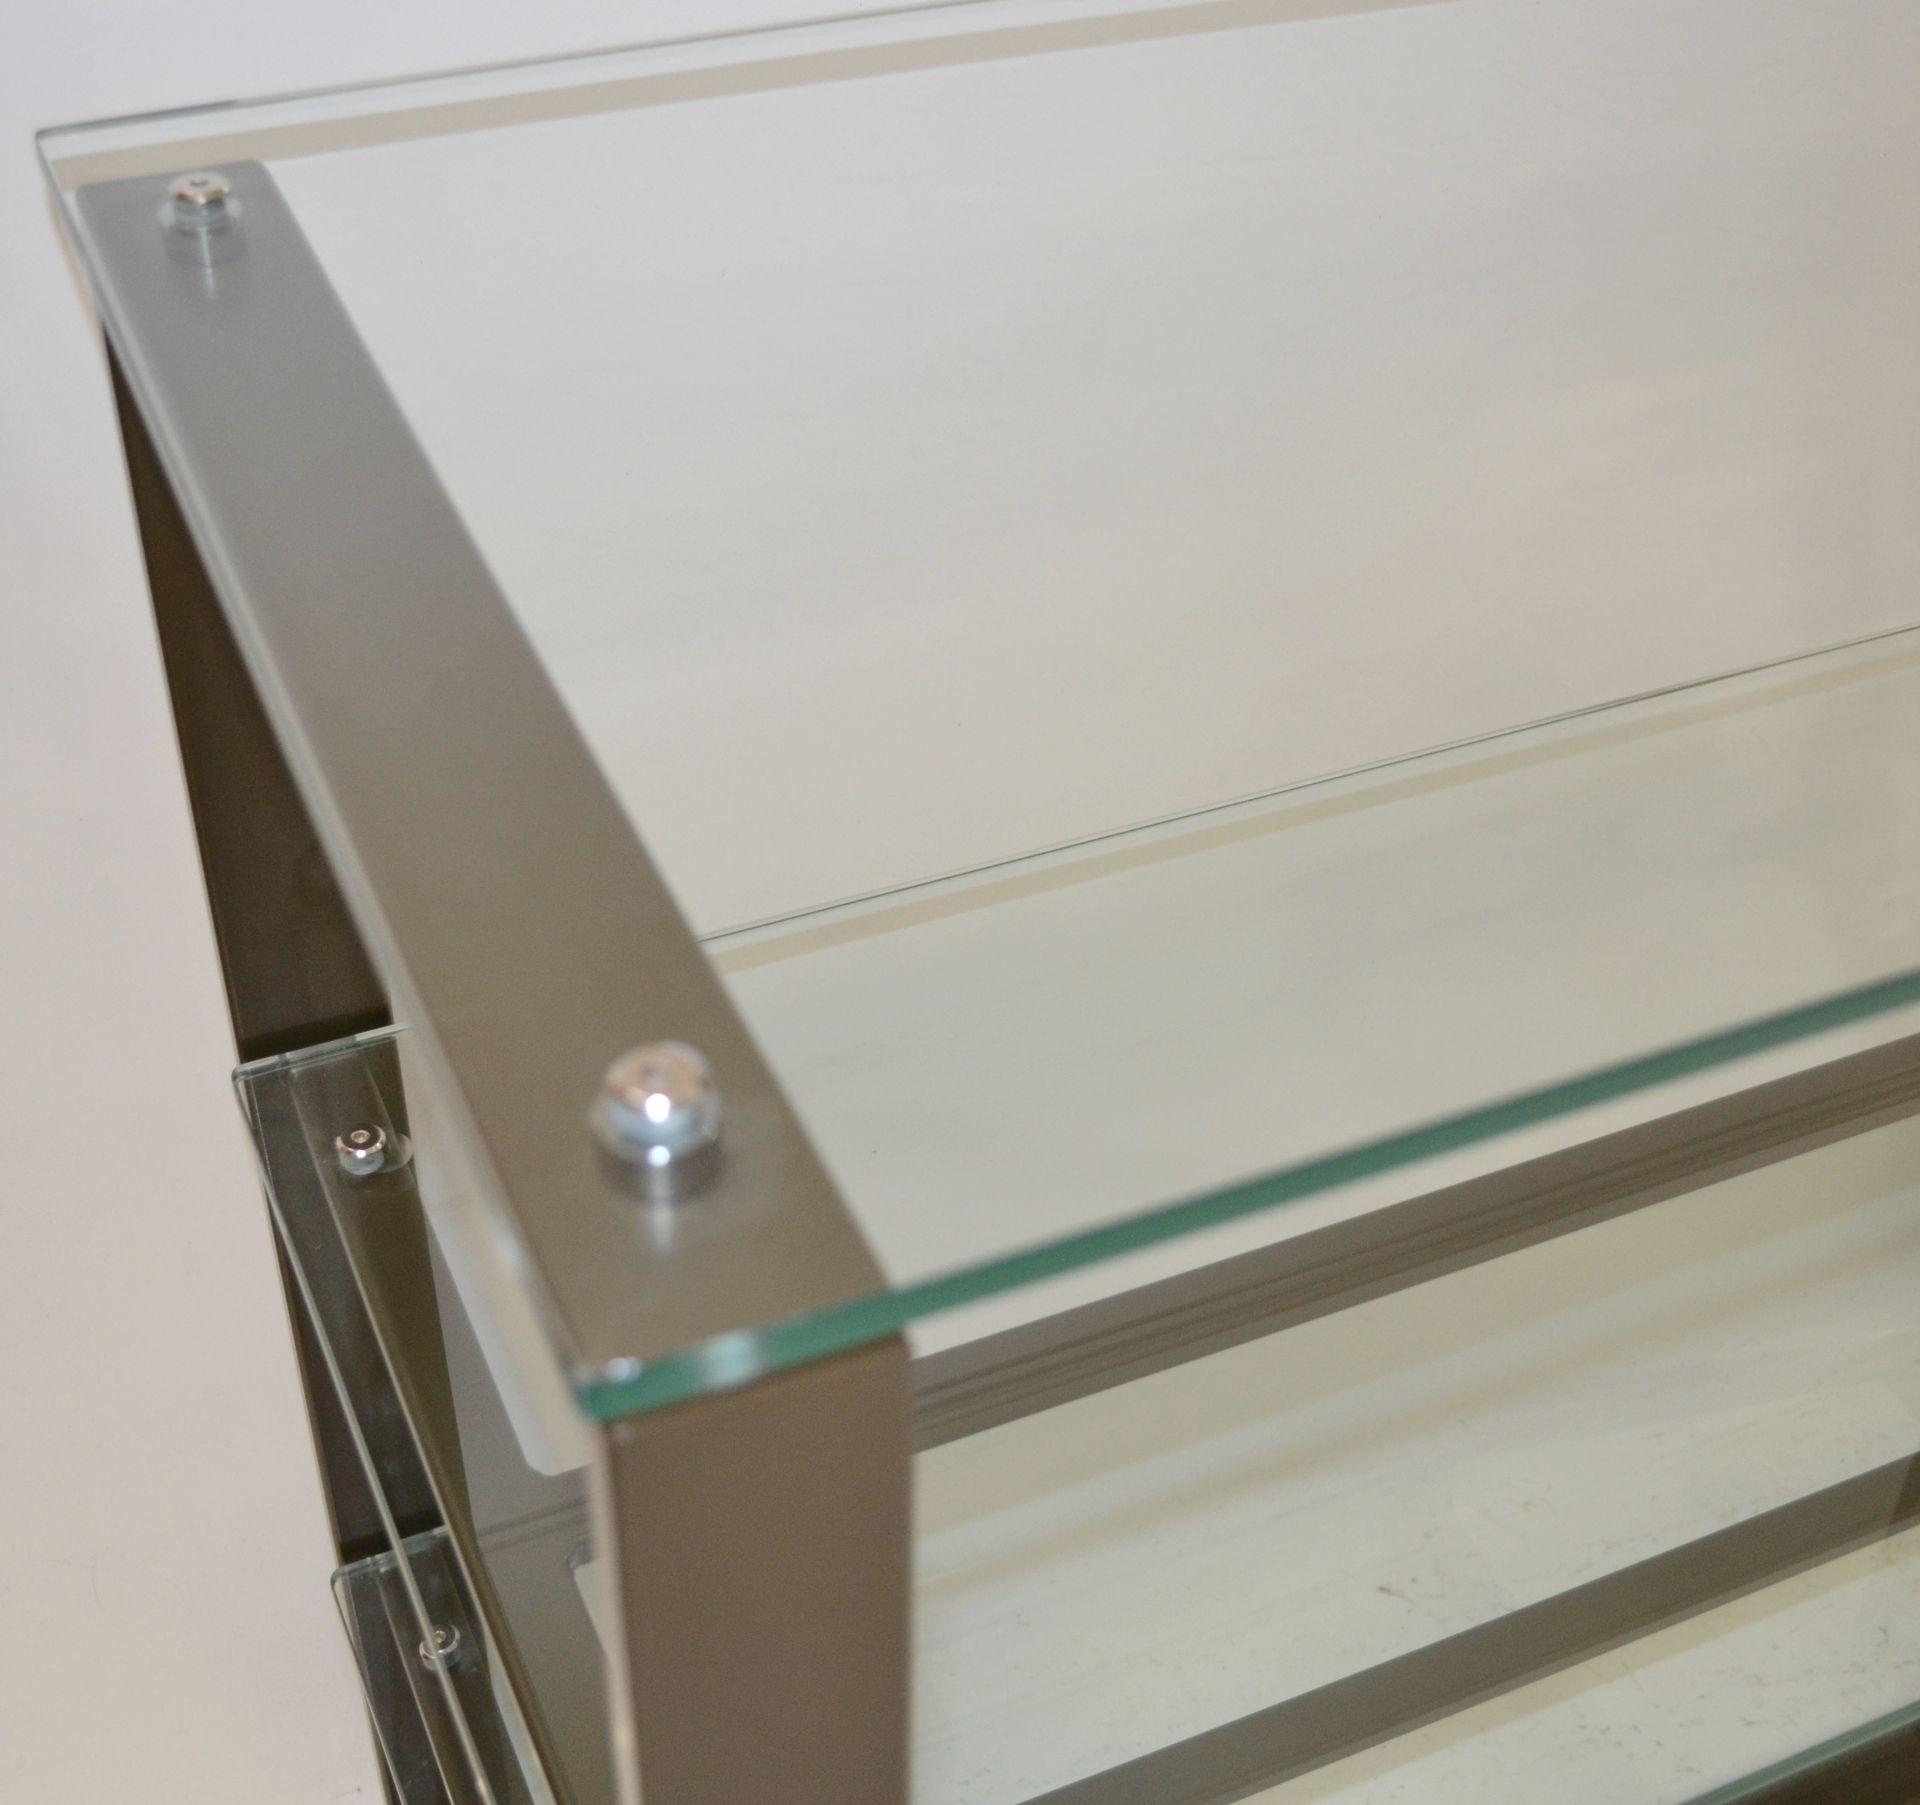 1 x 3-Shelf Glass Retail Display Unit With A Sturdy Metal Frame - Ex-Display, Recently Removed - Image 5 of 5